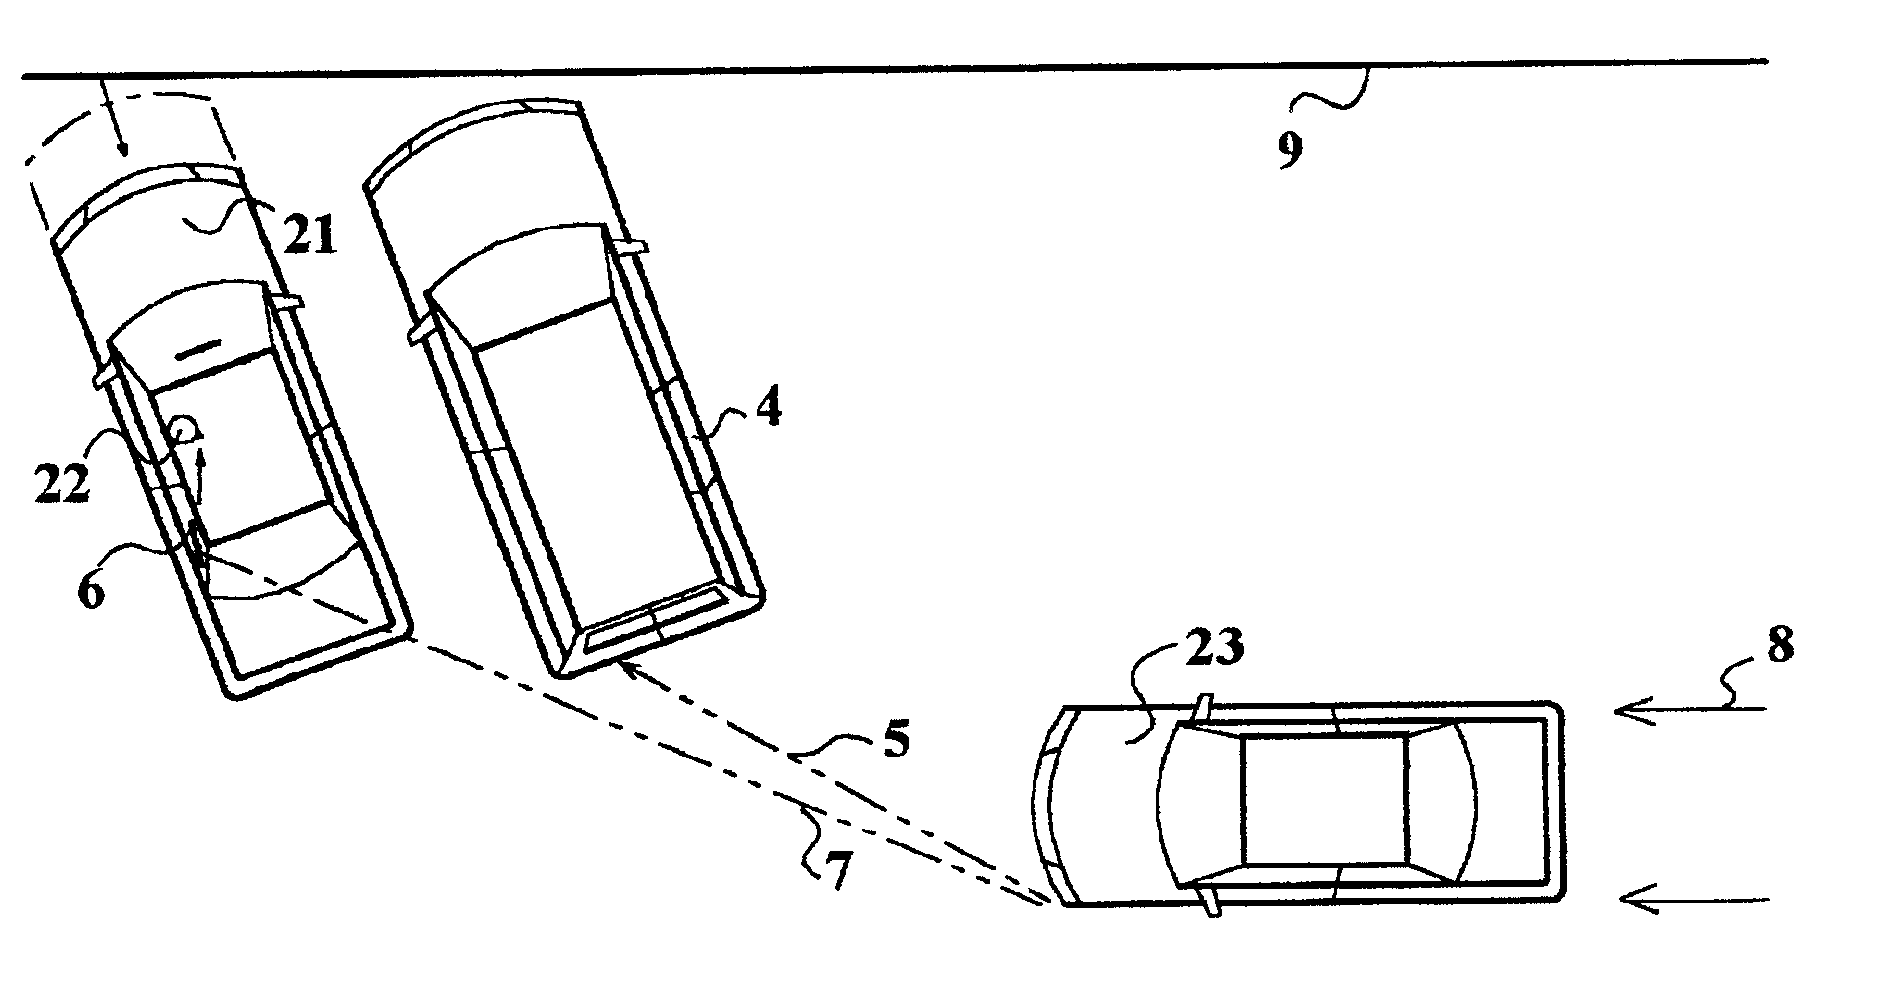 Back-up mirror system for vehicle safety when backing into lane(s) of cross-traffic with back-up mirror method